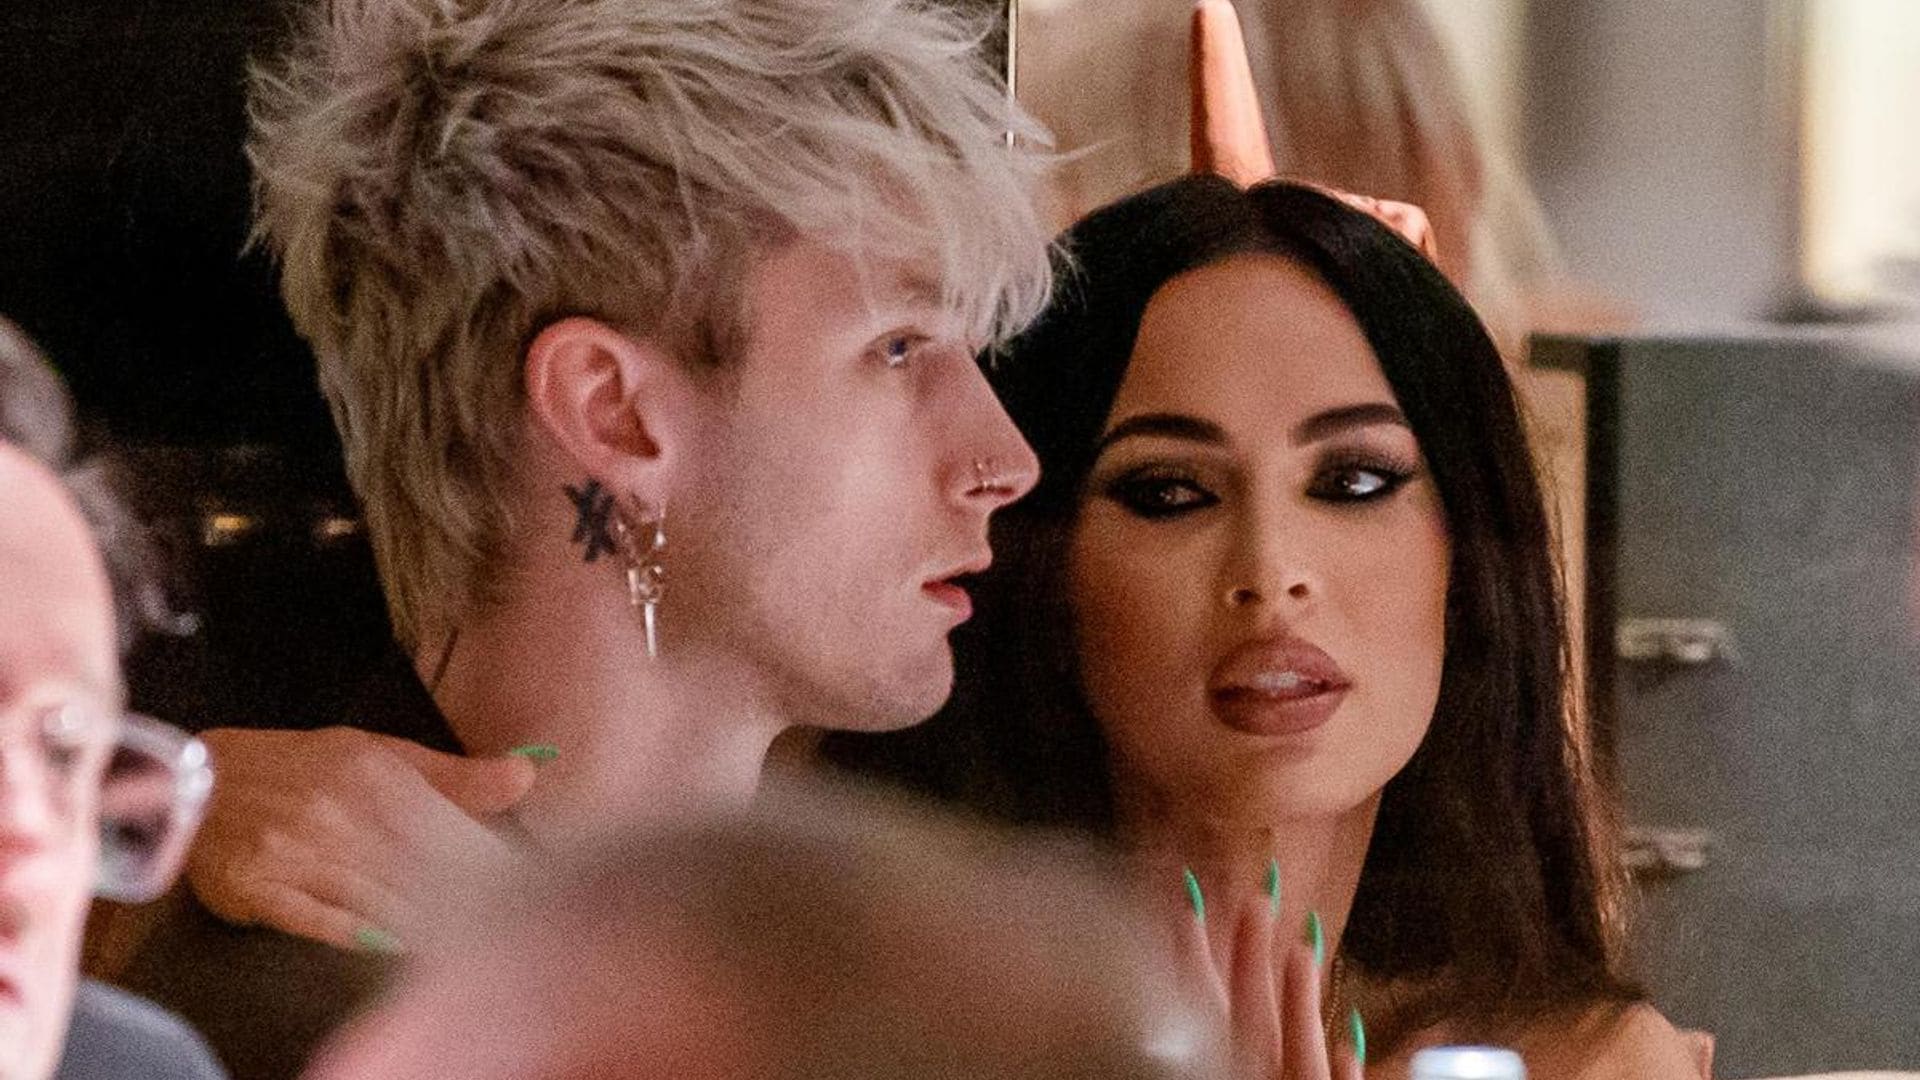 Why Megan Fox and Machine Gun Kelly drink each other’s blood: ‘Just a few drops’